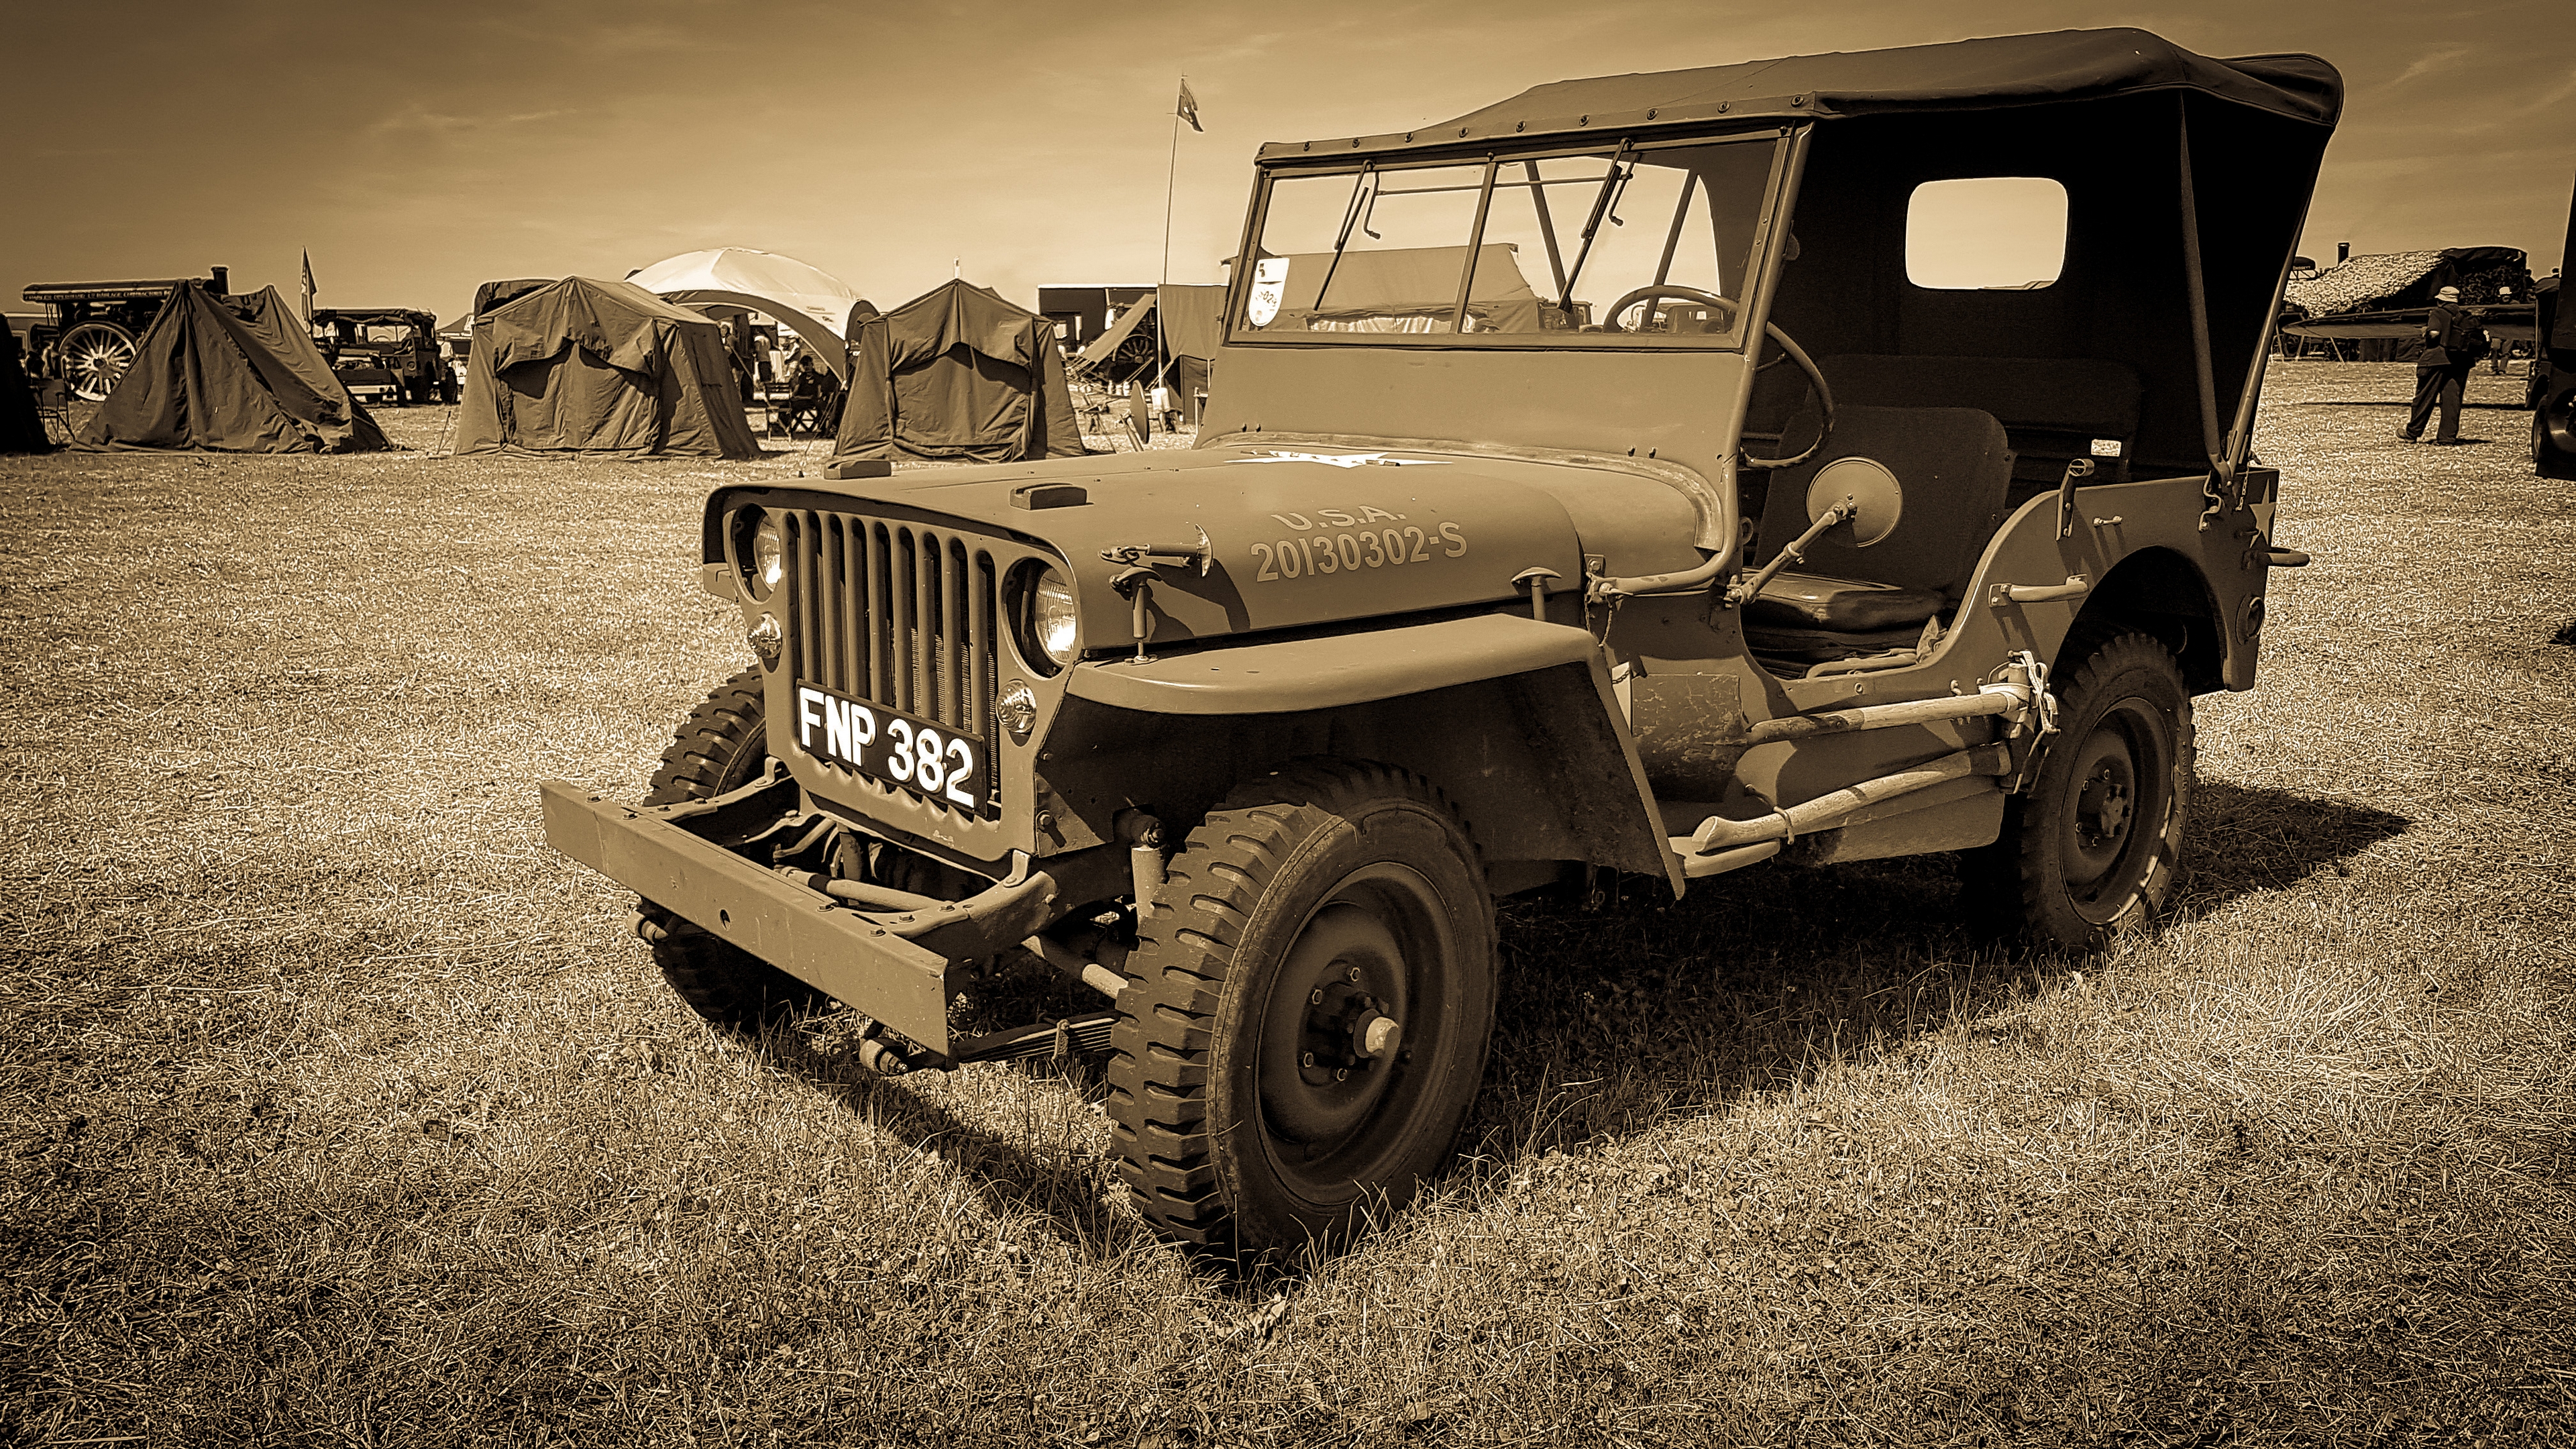 General 3840x2160 military army car USA sepia frontal view Jeep